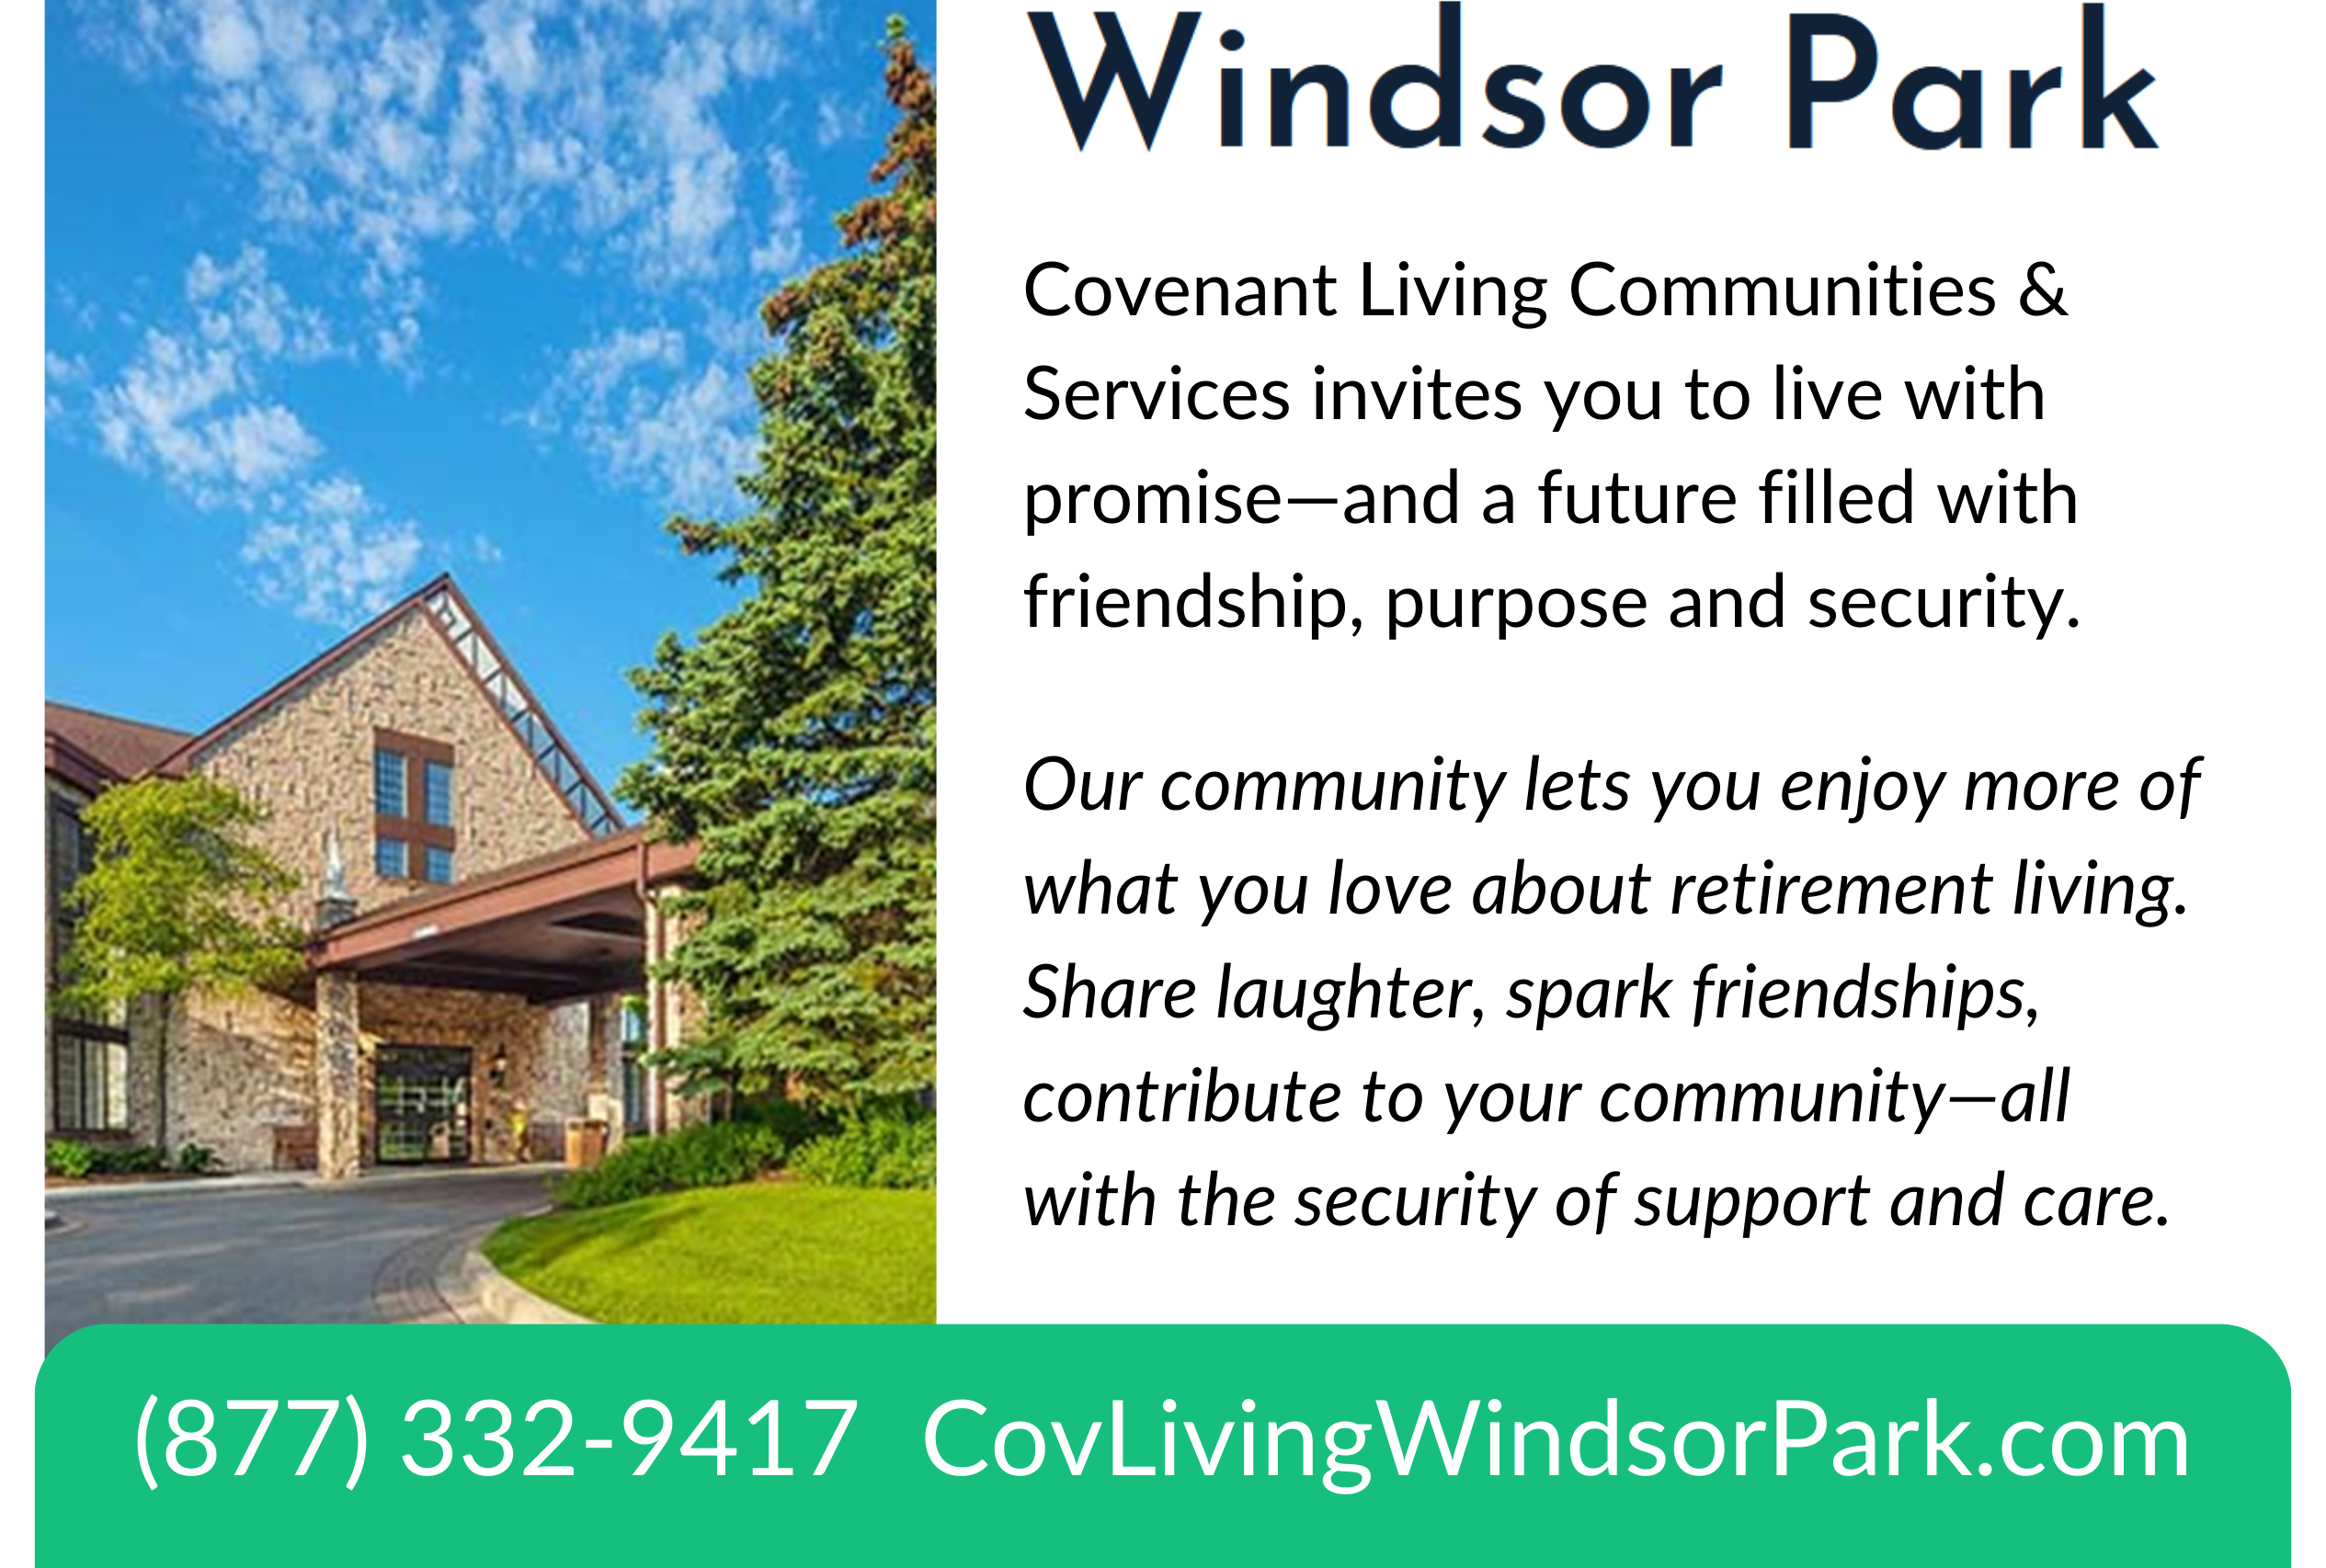 Wheaton Sport Center C2 Partner - Windsor Park, Our community lets you enjoy more of what you love about retirement living. Share laughter, spark friendships, contribute to your community—all with the security of support and care.